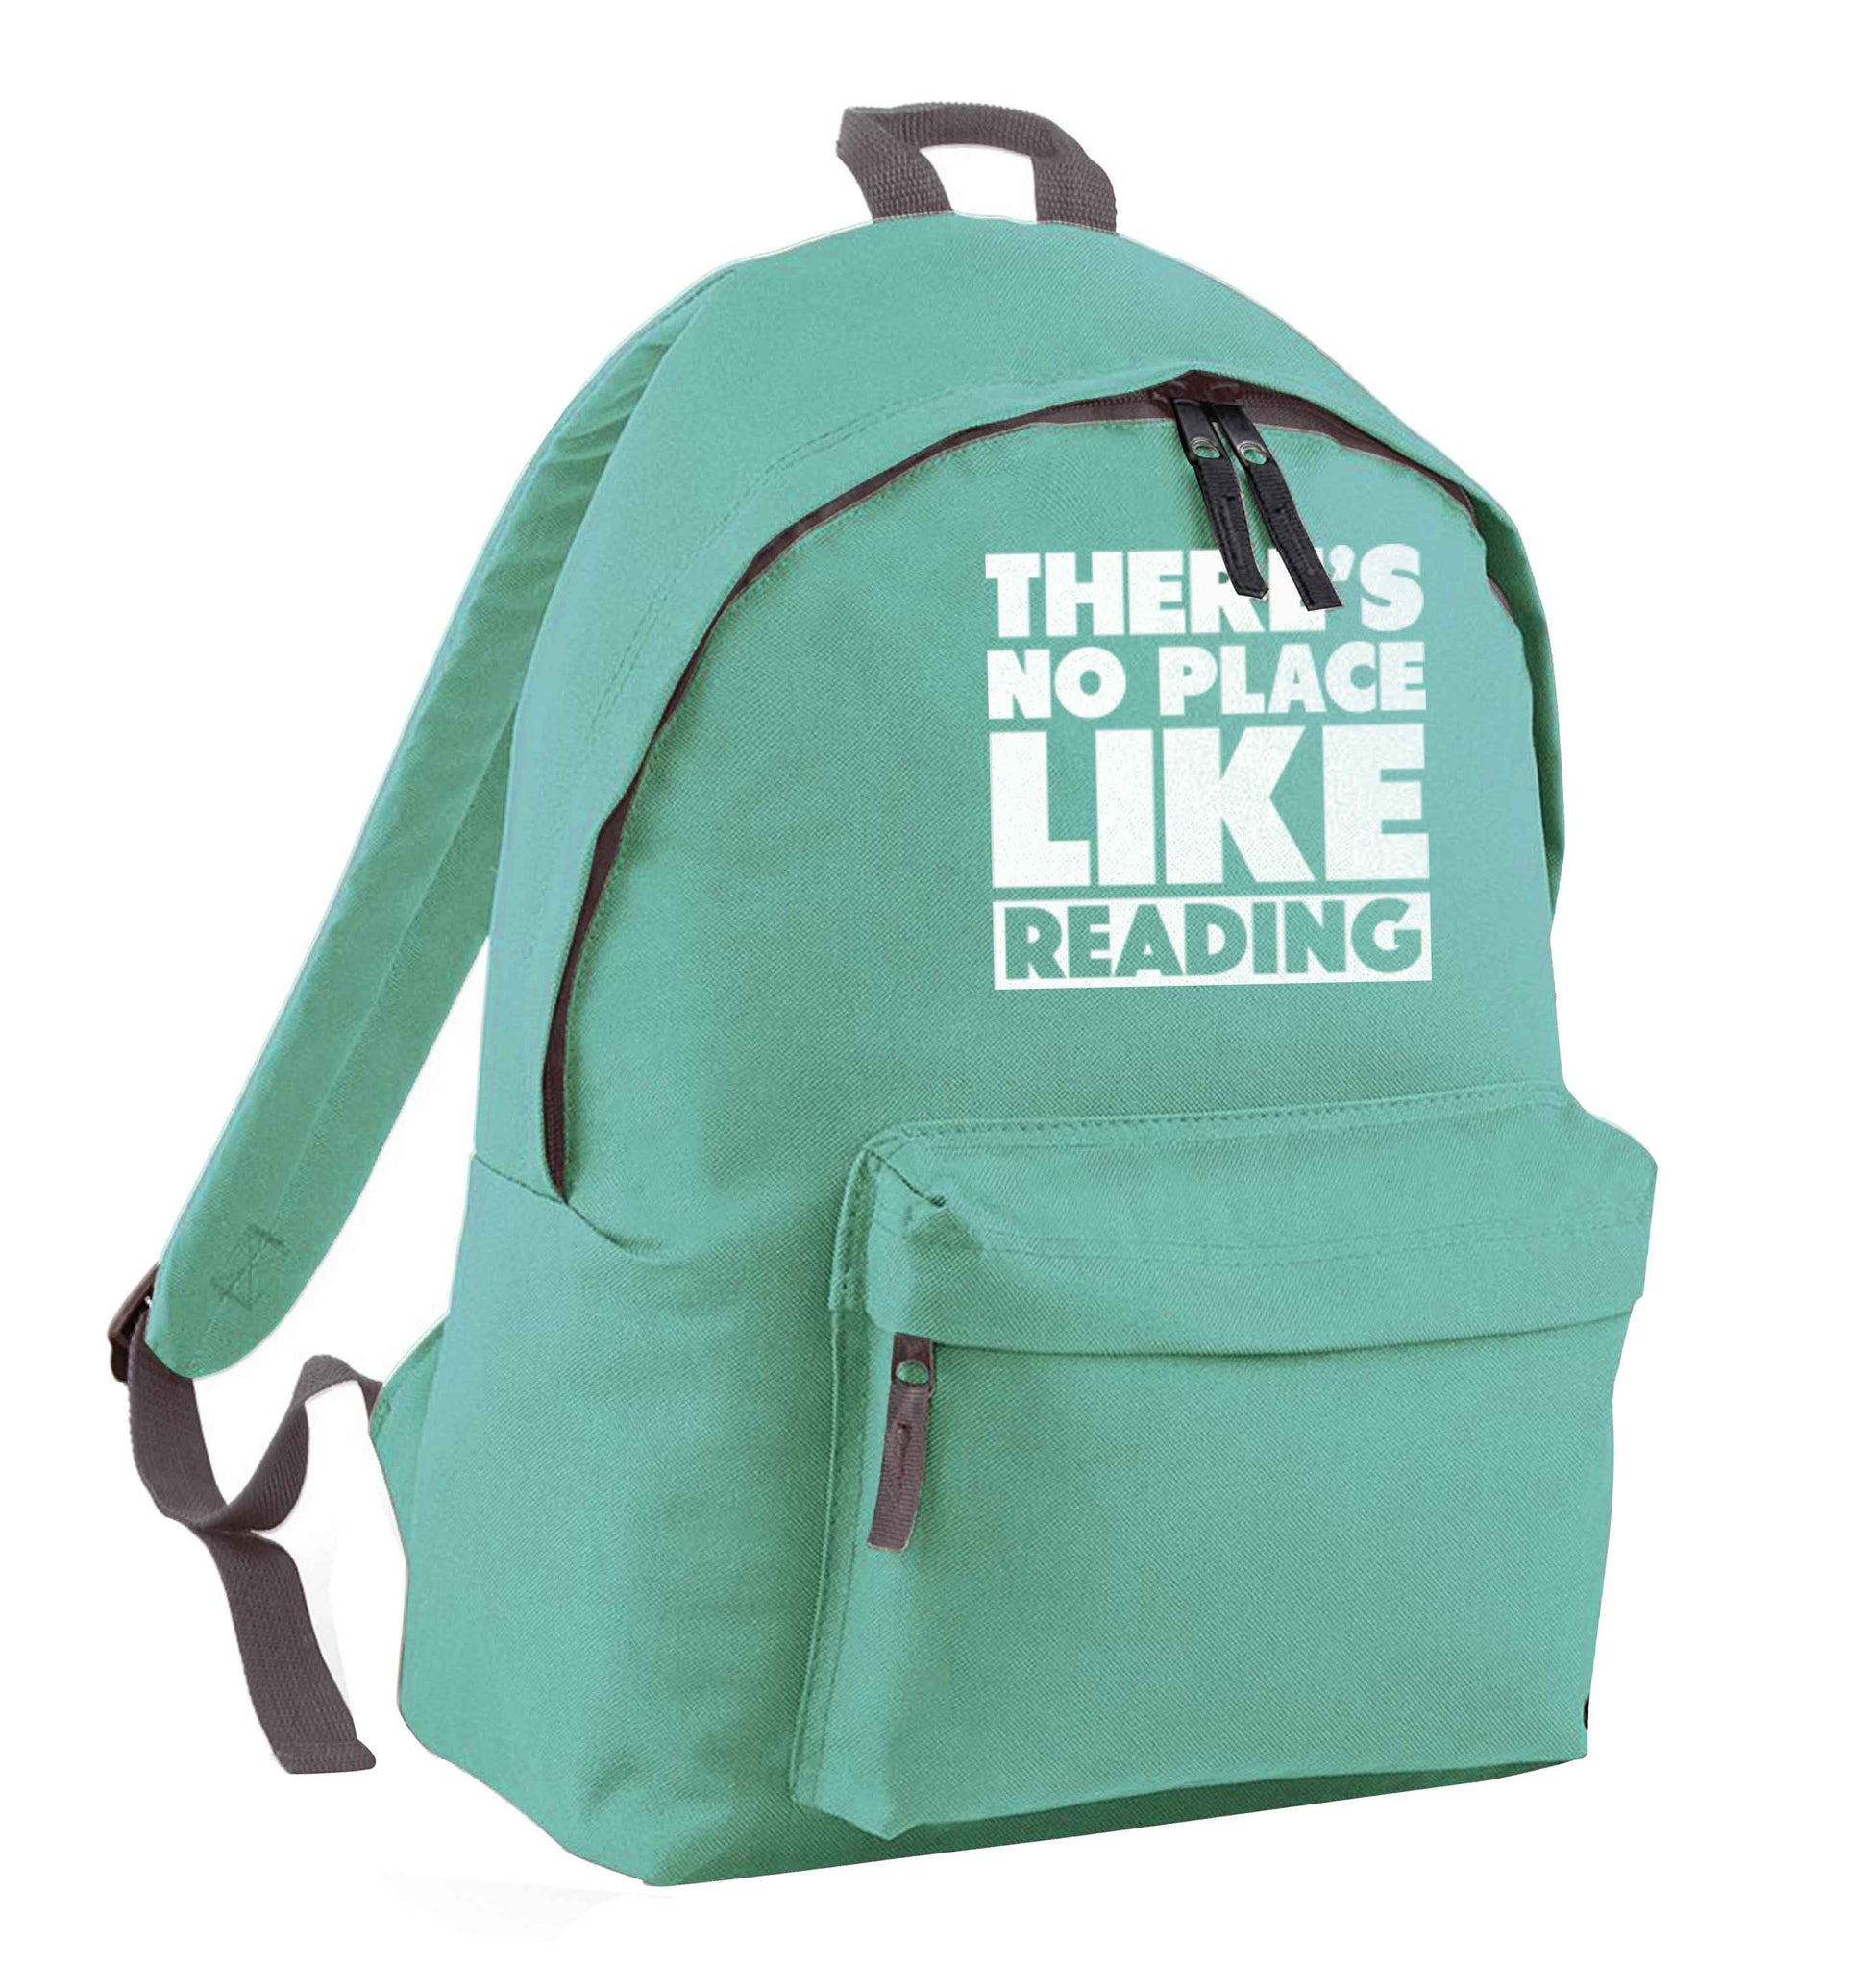 There's no place like Readingmint adults backpack